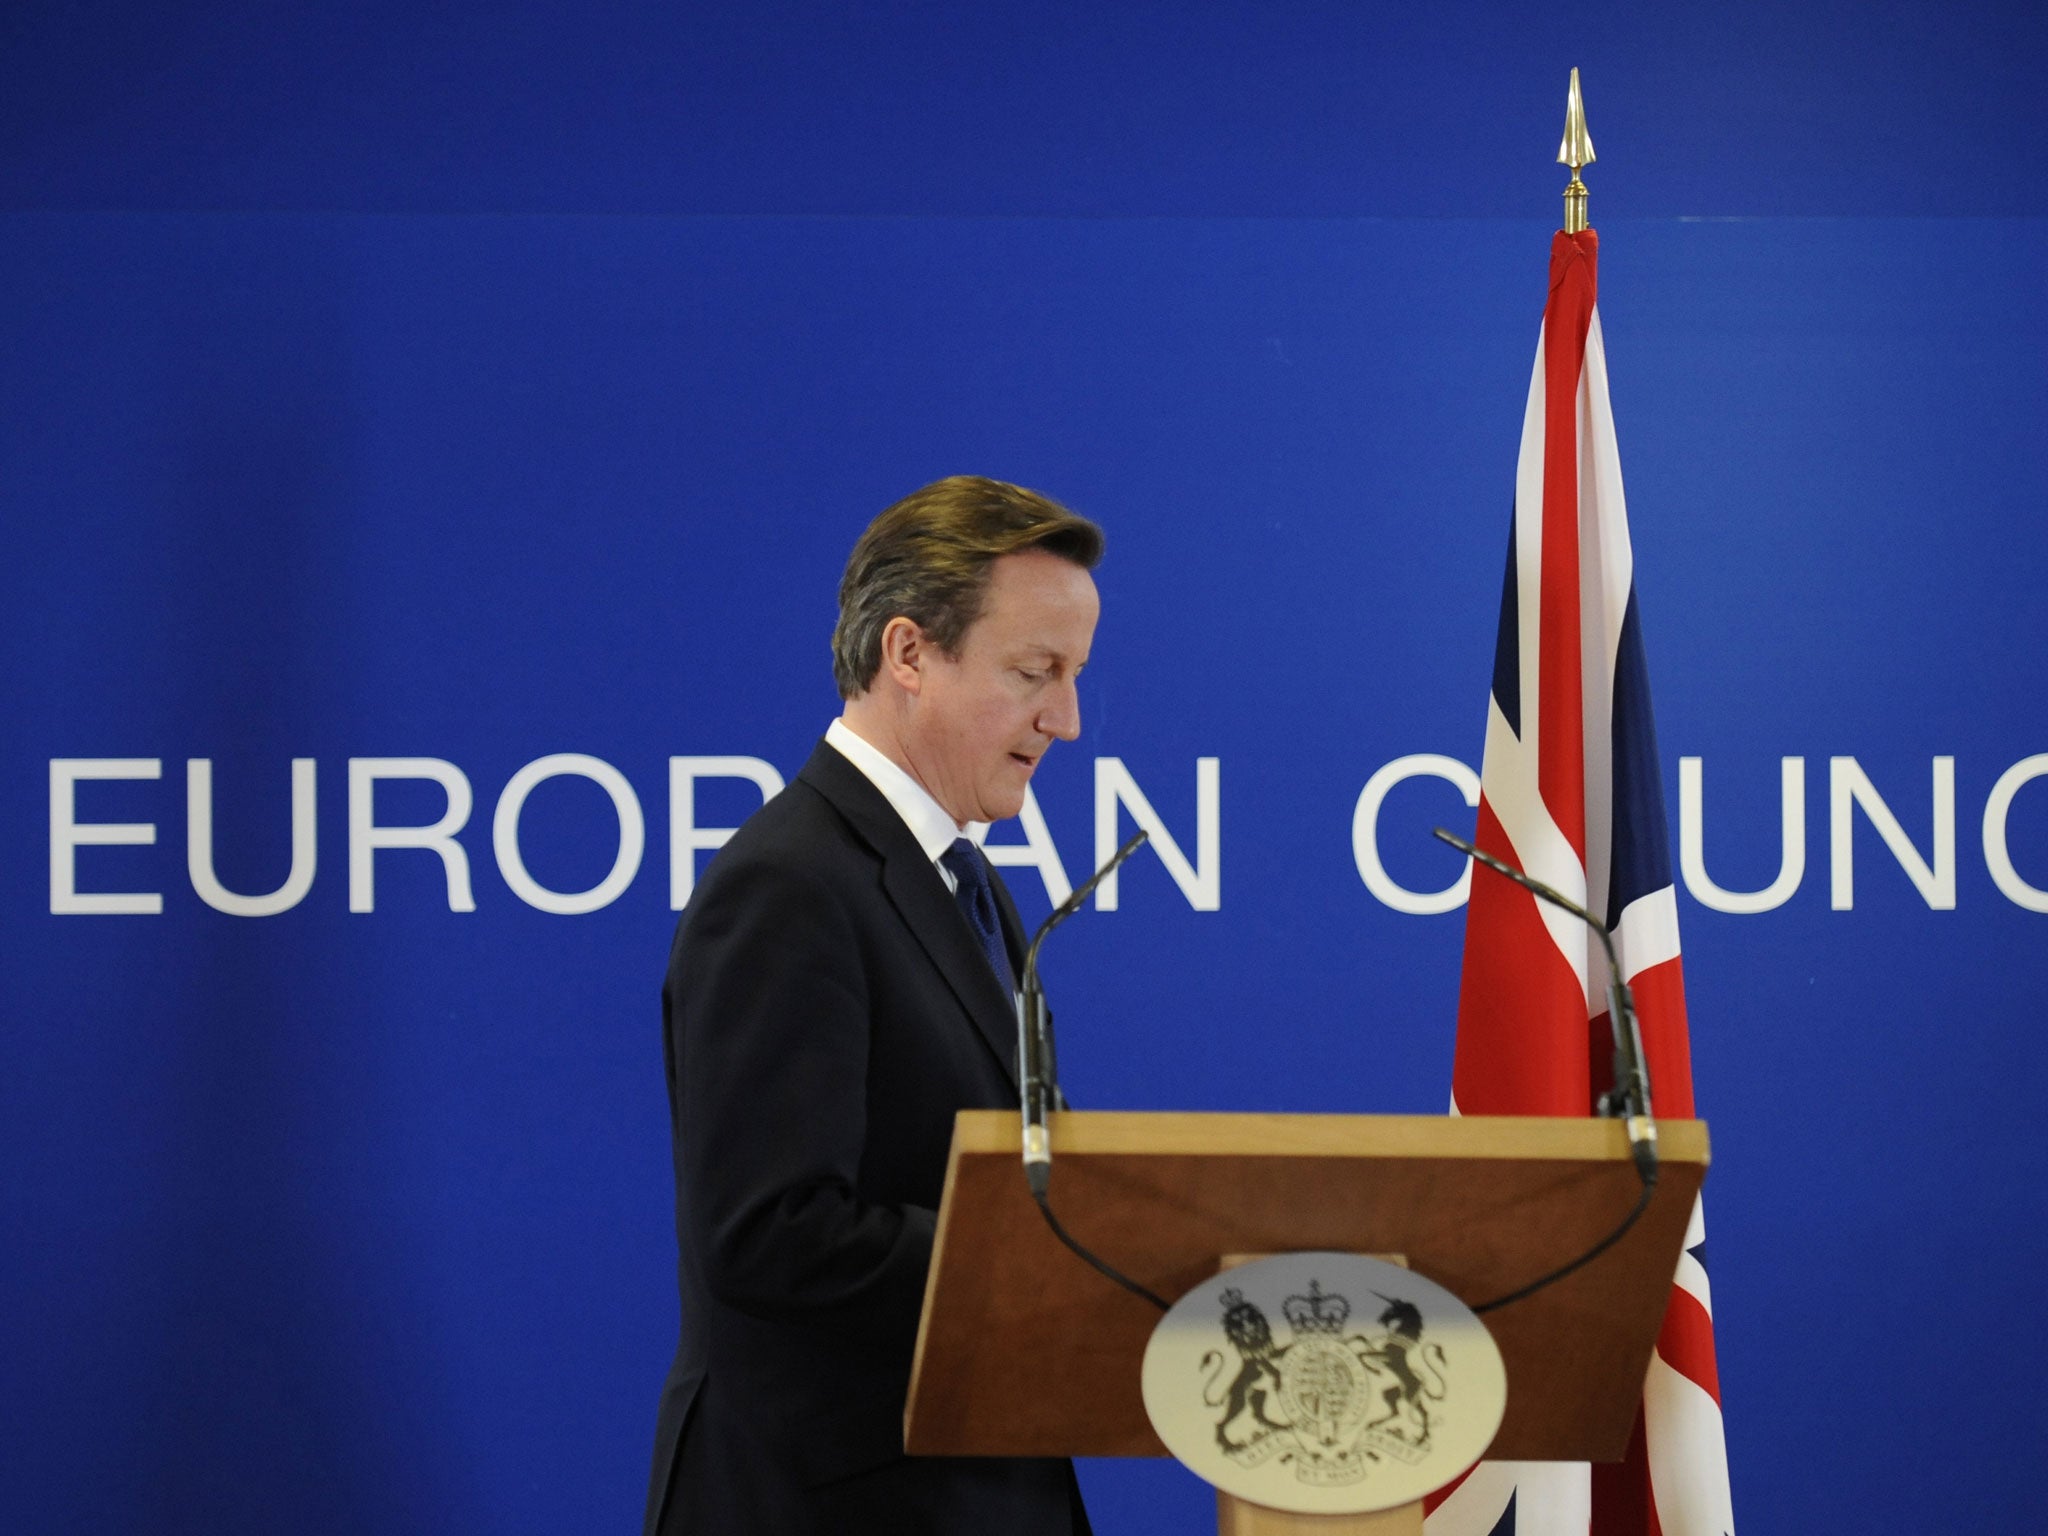 David Cameron arrives to give a press conference at the EU Headquarters, on November 23, 2012 in Brussels, after a two-day EU leaders budget summit.